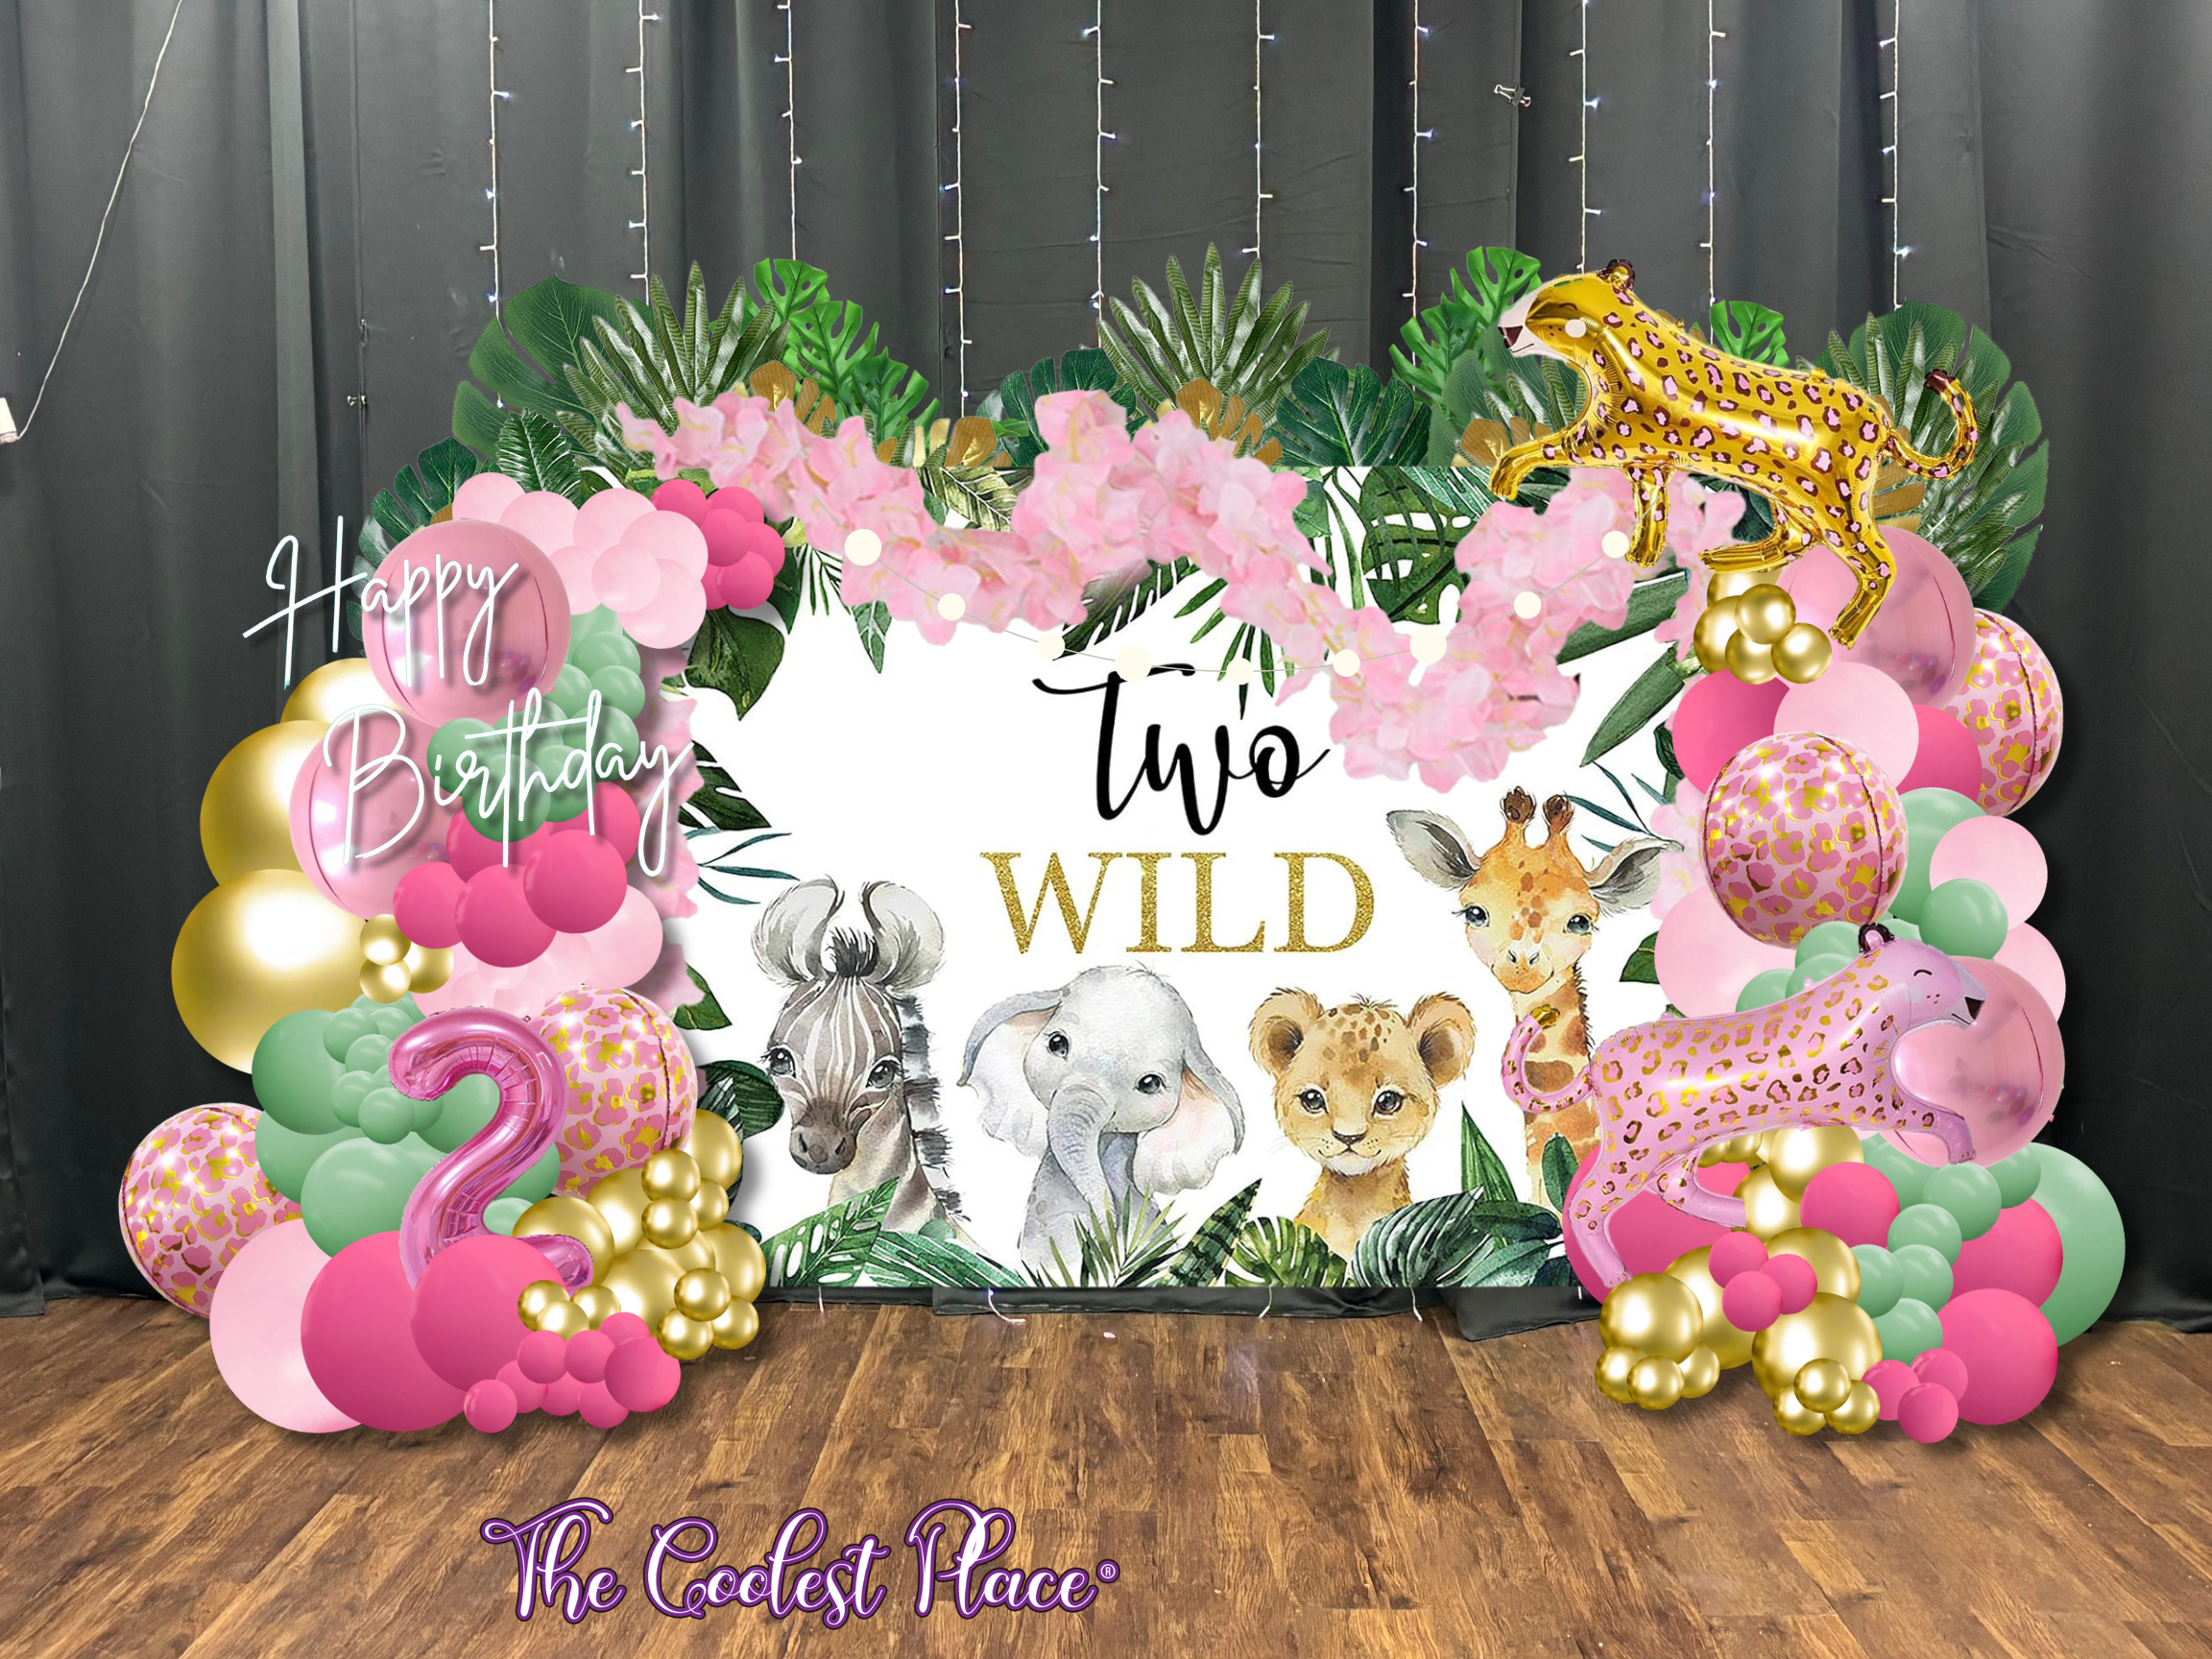 Two Wild Pink Leopard Decor Set with Pink, Green, Gold balloons arranged with palm leaves